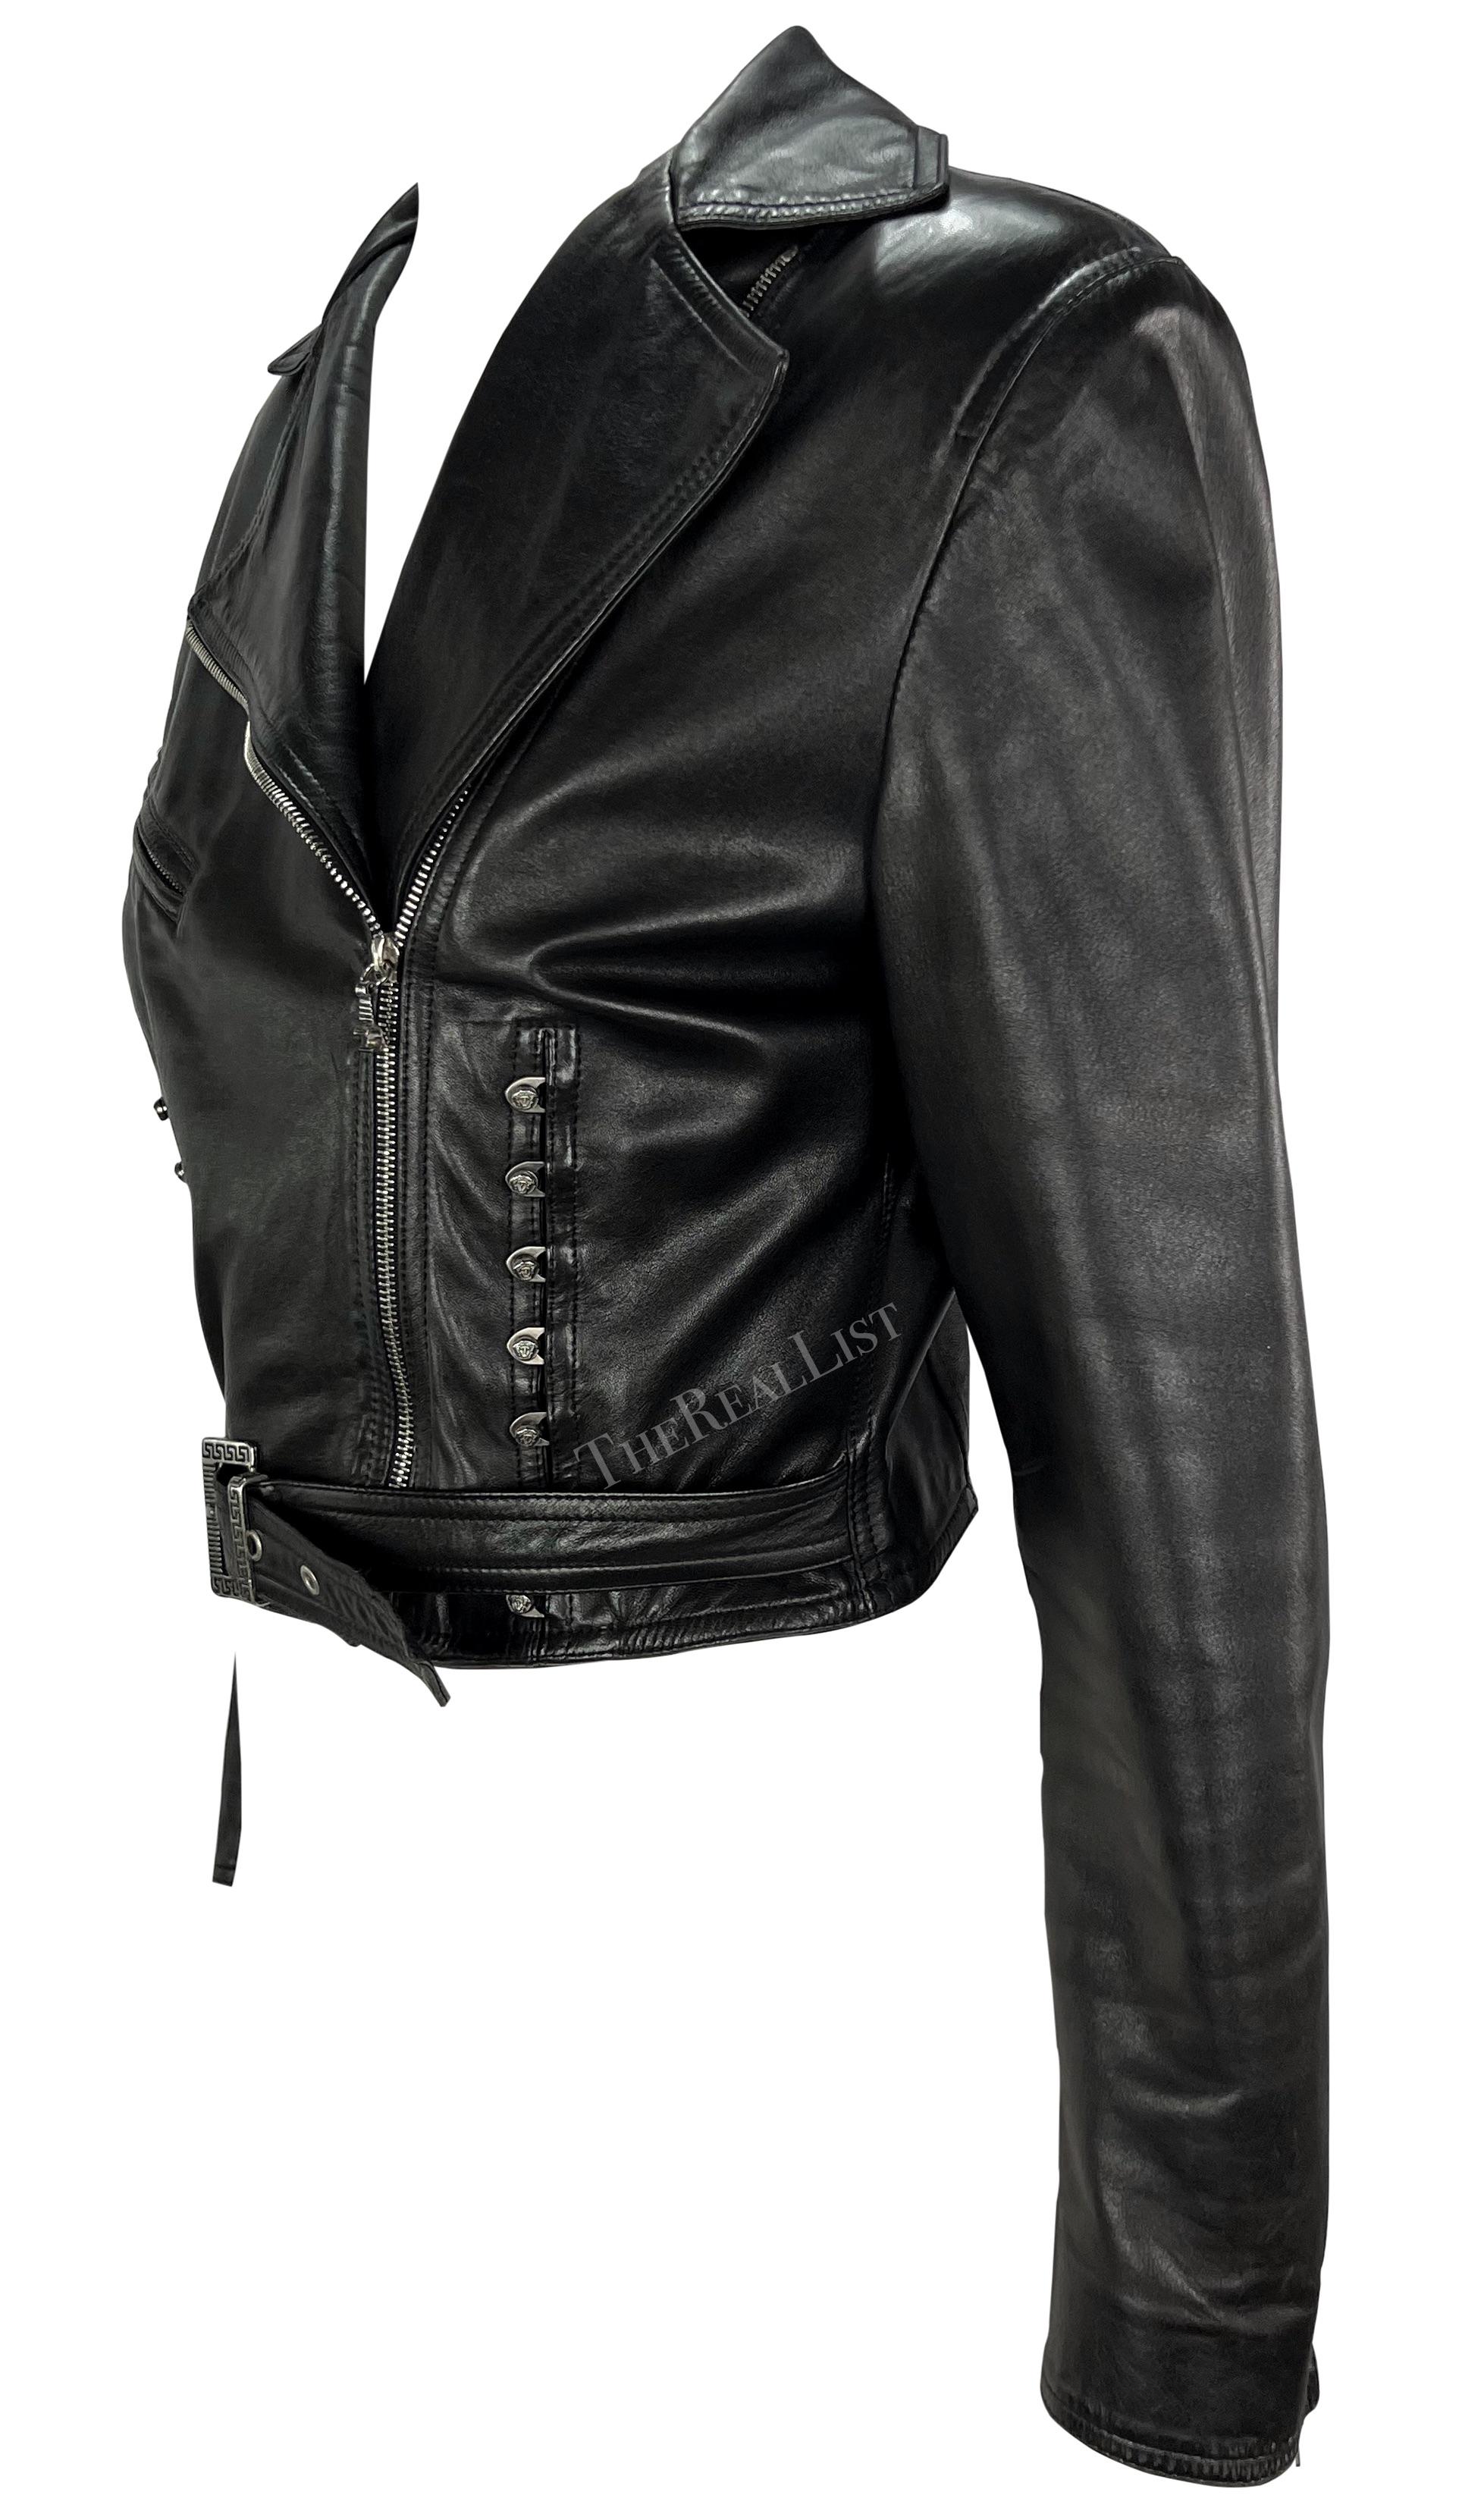 Introducing a stunning black leather cropped moto jacket from Gianni Versace, designed by Gianni Versace himself. This chic piece from the Spring/Summer 1995 collection is a true embodiment of Versace's signature style. The jacket features a